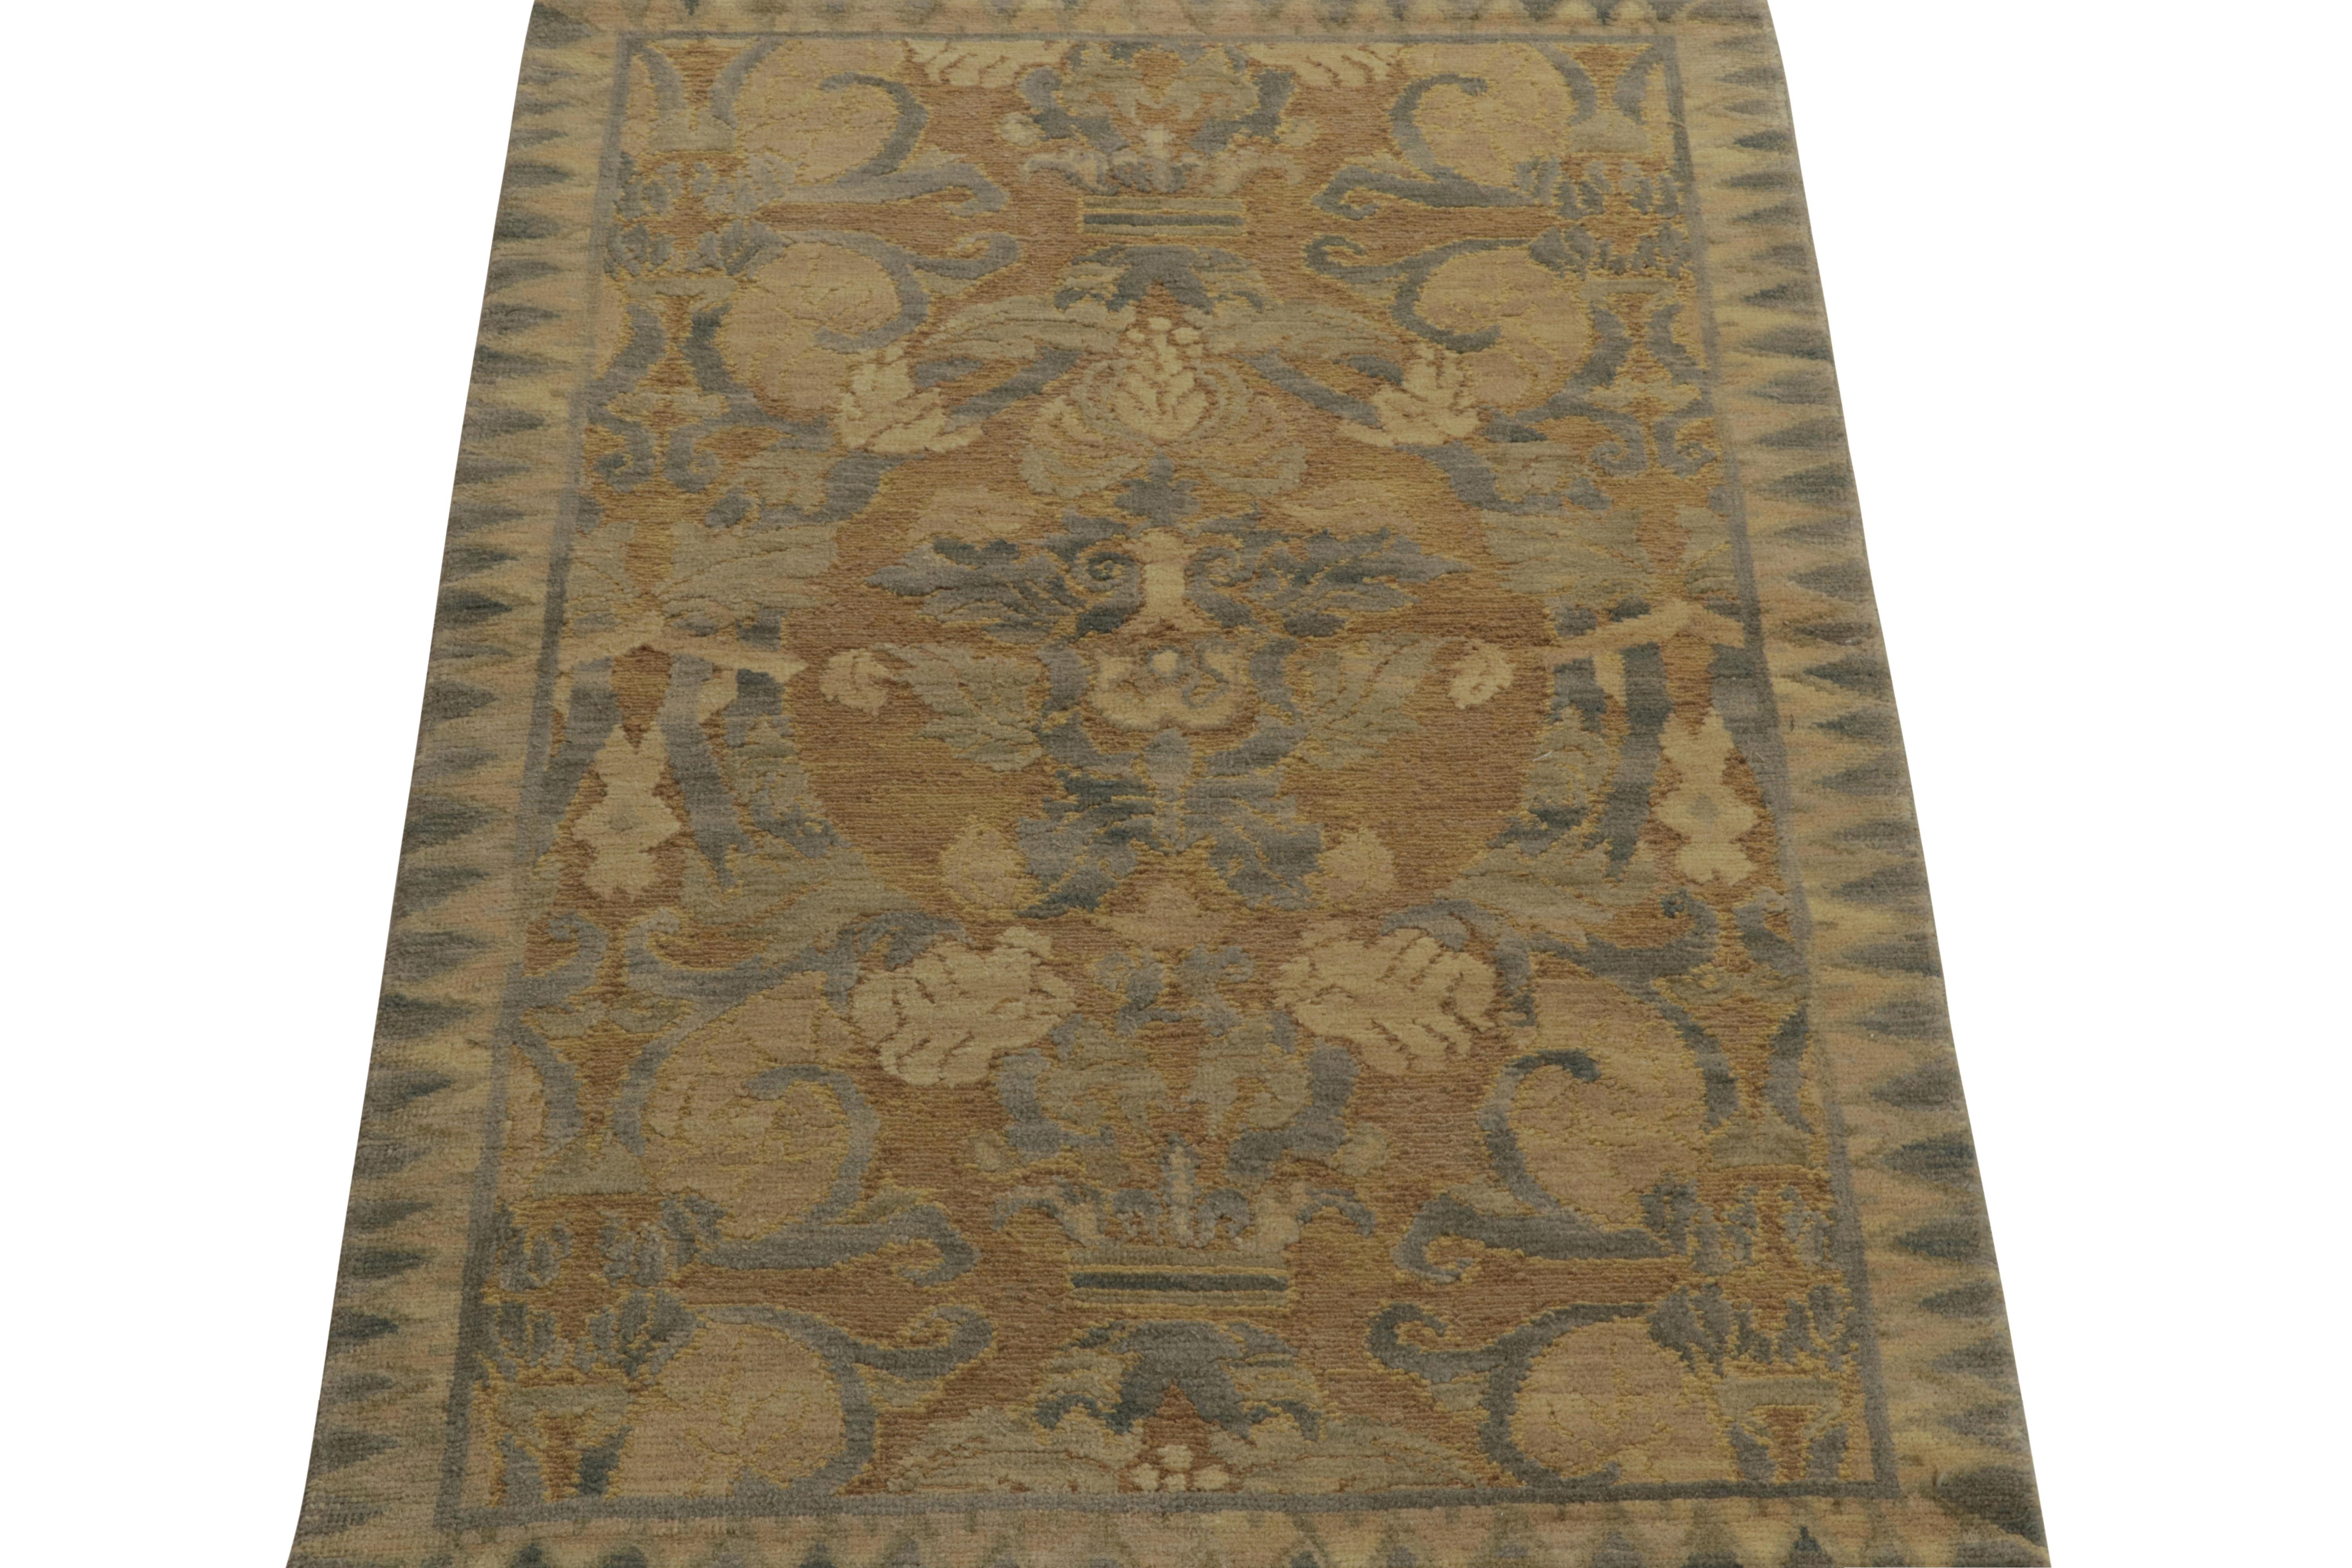 Arts and Crafts Rug & Kilim’s Arts & Crafts Style Rug in Beige-Brown and Blue Floral Patterns For Sale